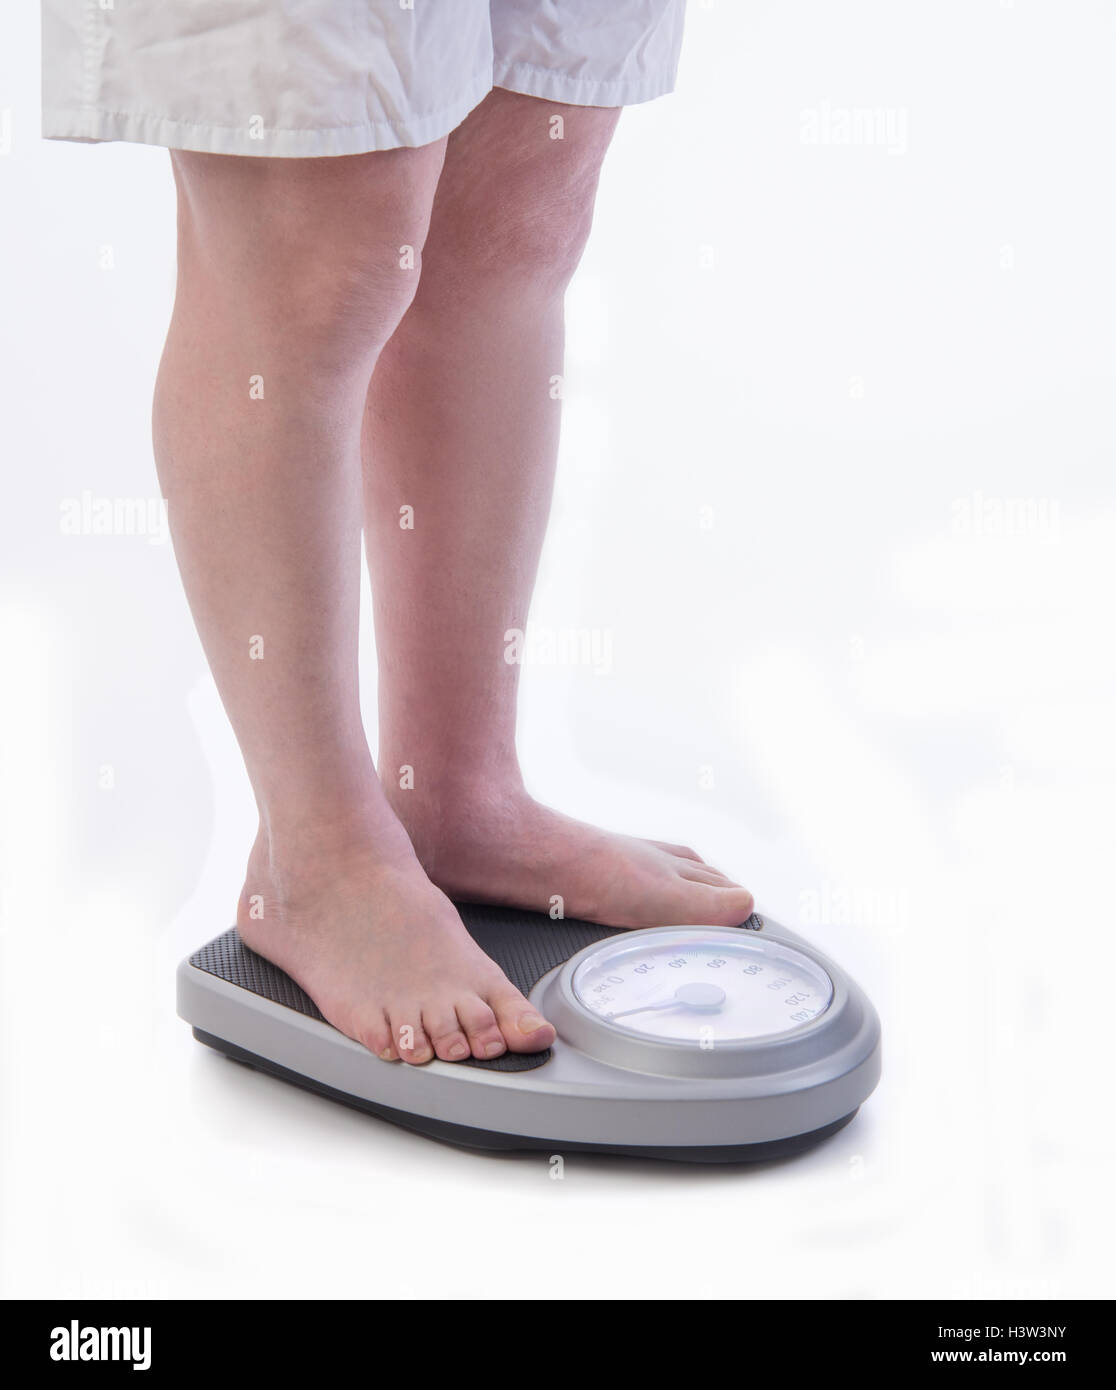 Body-Weight professional people weighing scales